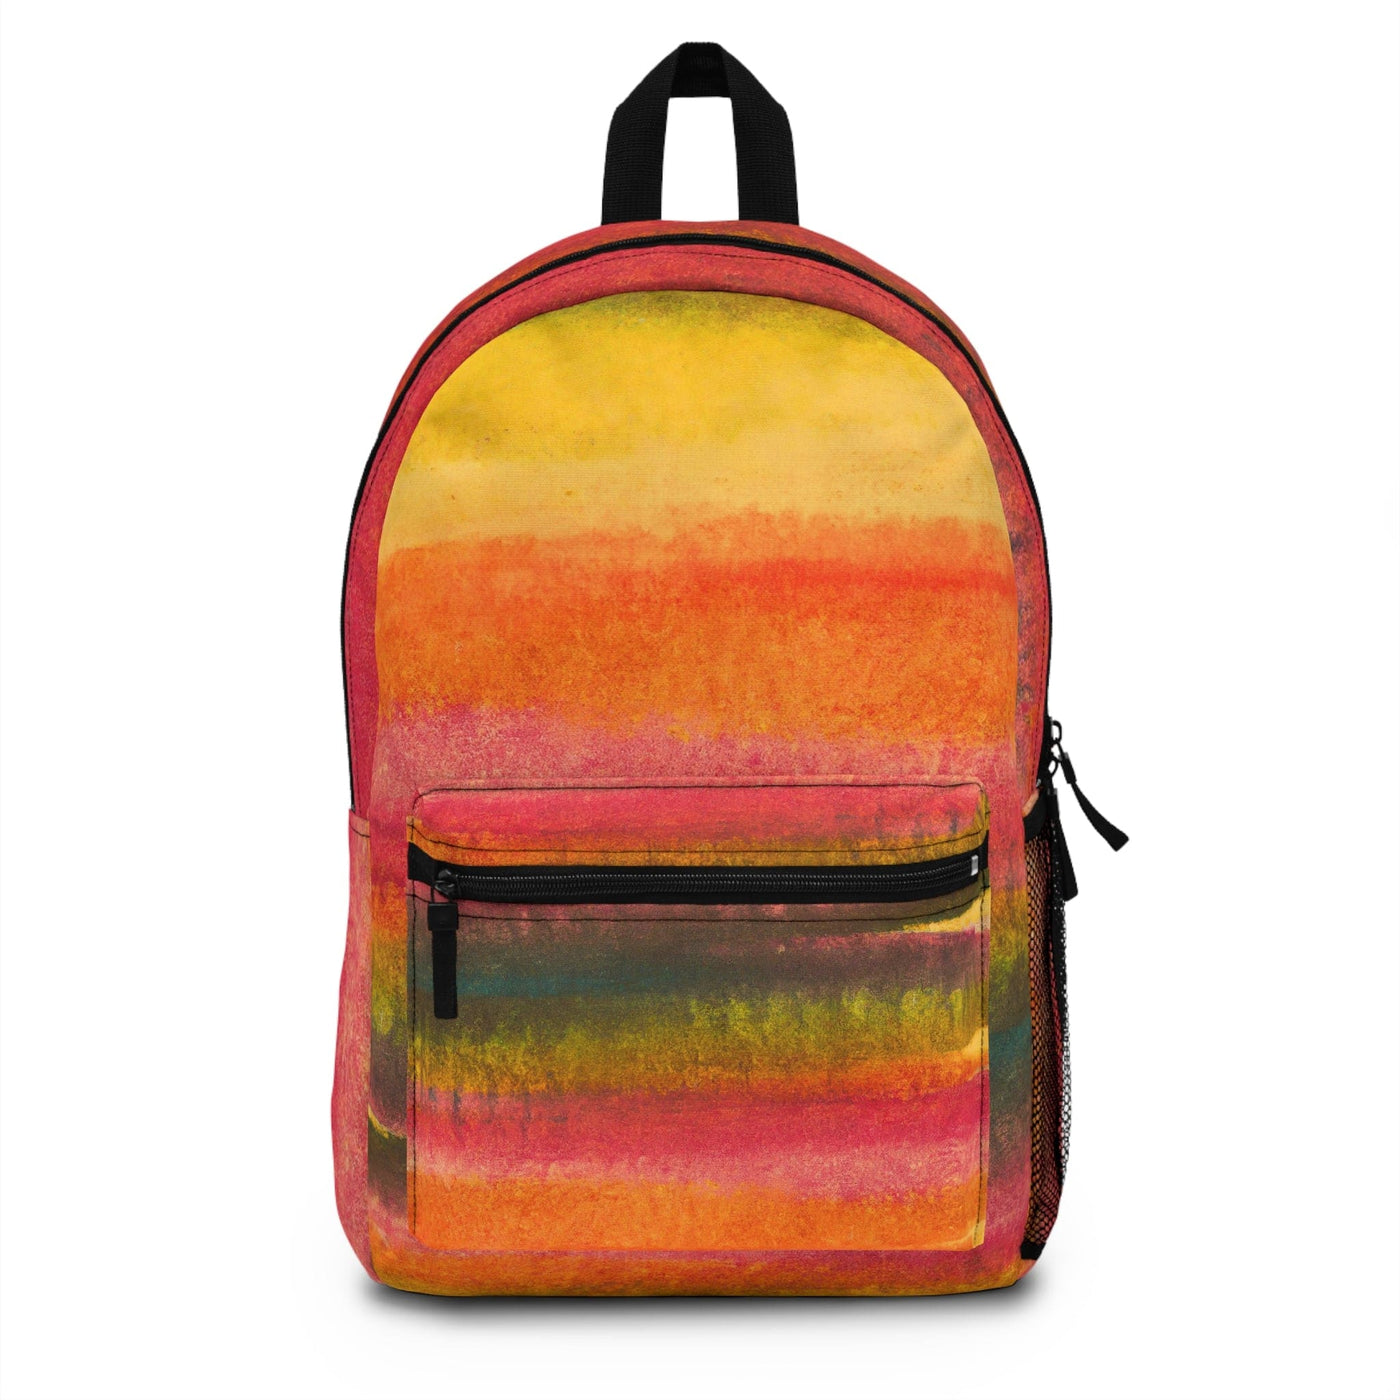 Backpack - Large Water - resistant Bag Autumn Fall Watercolor Abstract Print